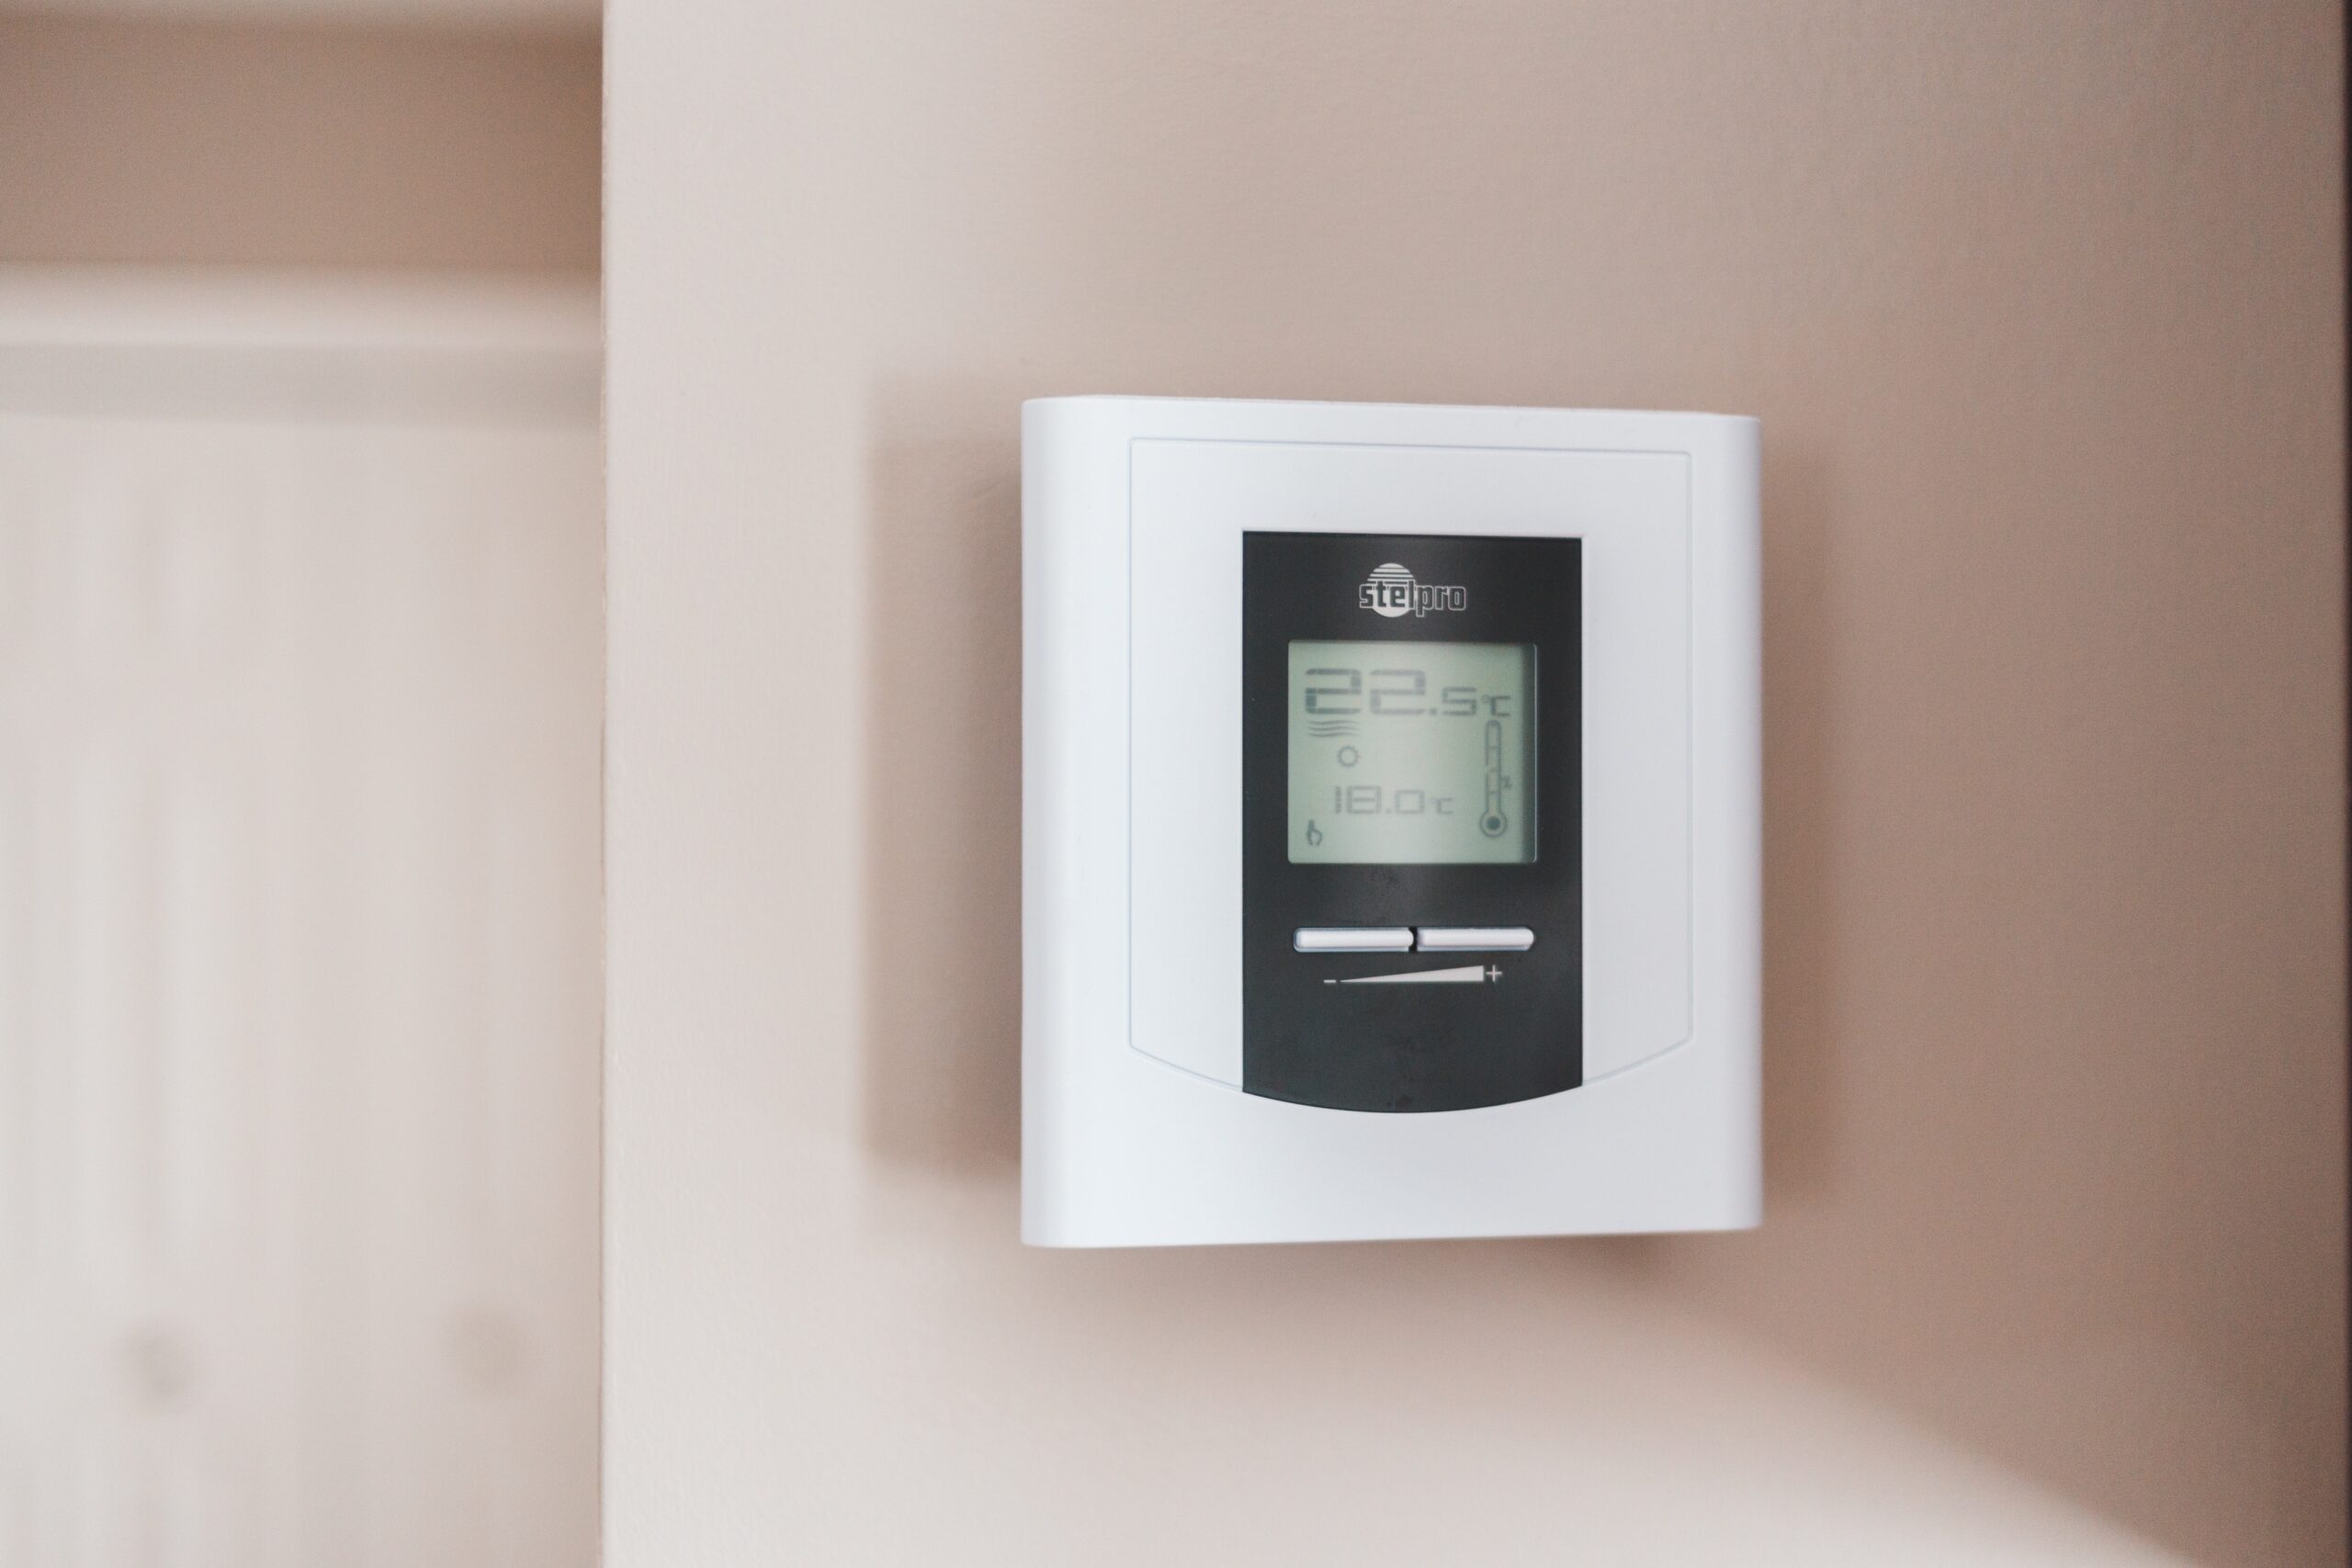 Thermostat at home